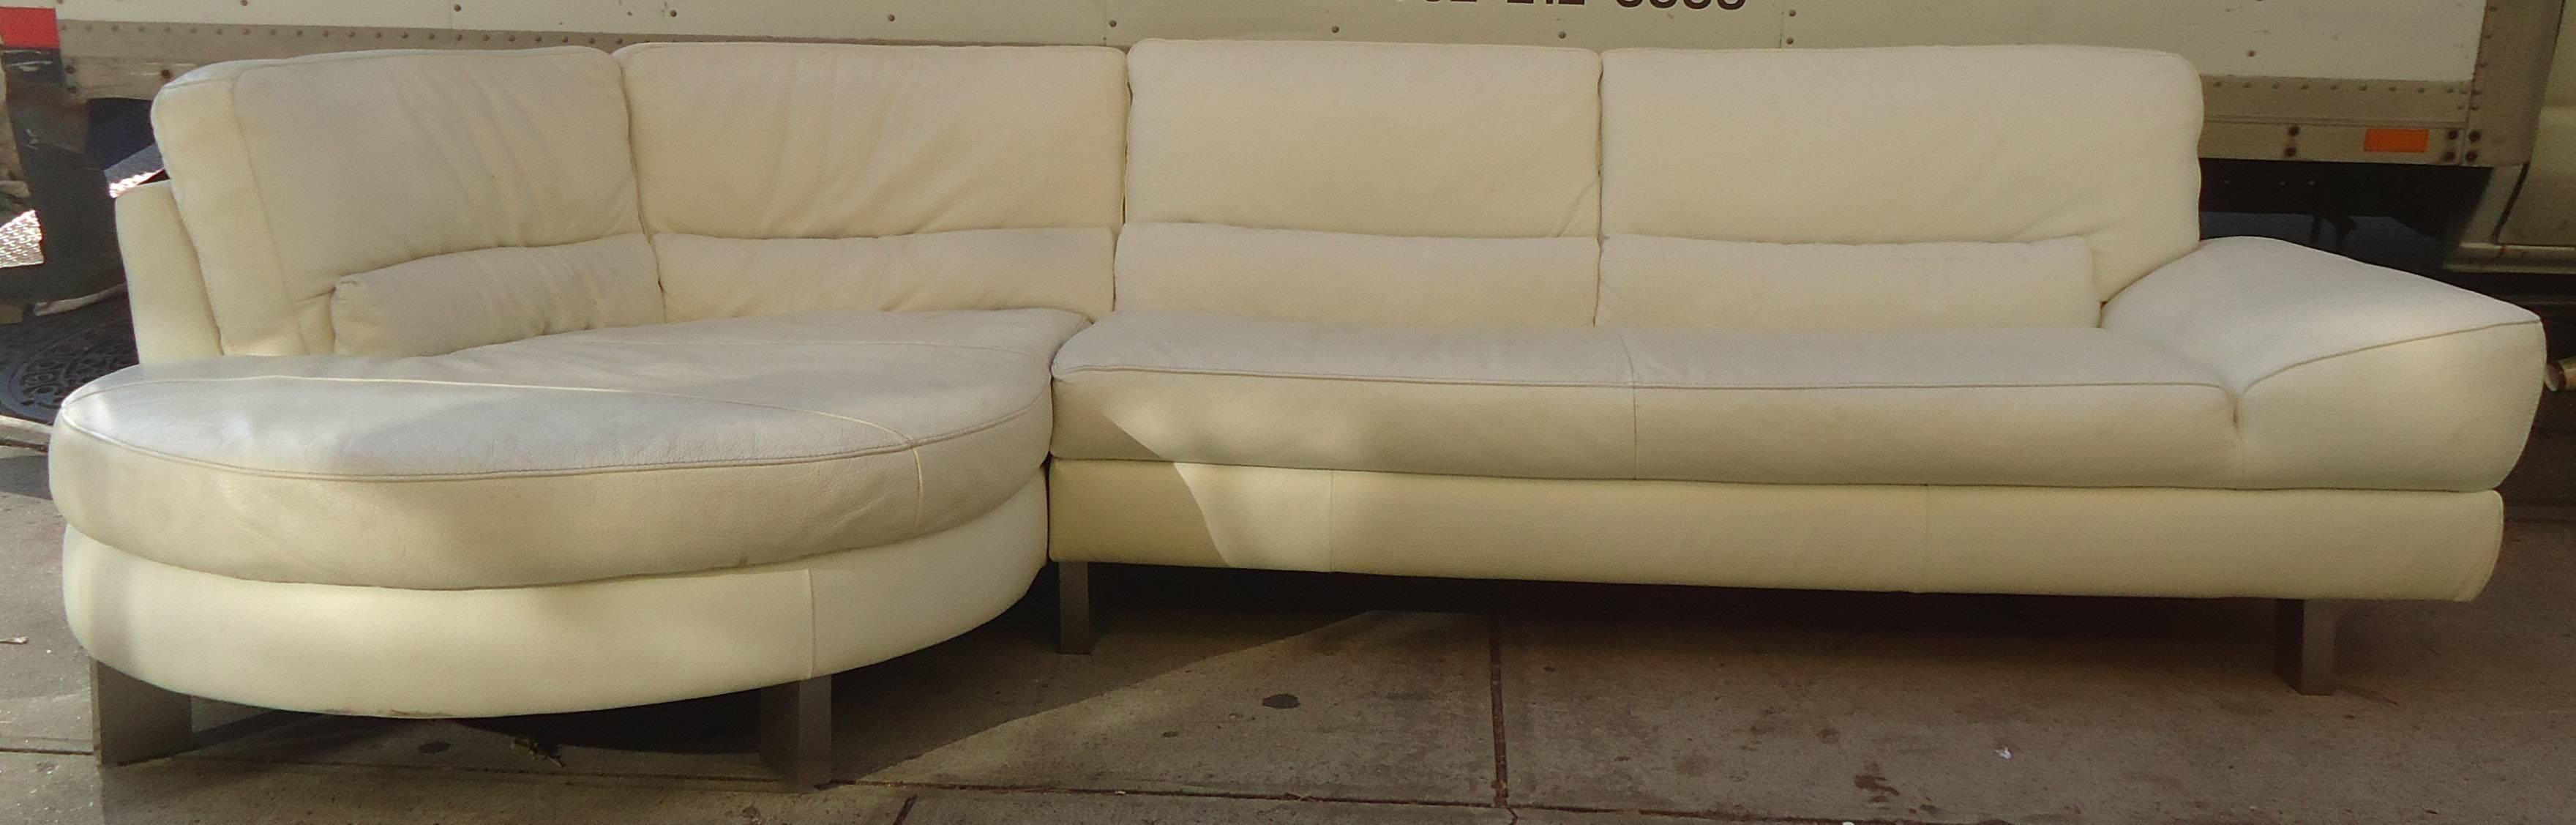 Vintage-modern sectional sofa features leather upholstery and chrome feet. Italsofa by Natuzzi. This distinctive modern sectional sofa adds to the stylish Italian design of the piece. 

Please confirm item location NY or NJ with dealer.